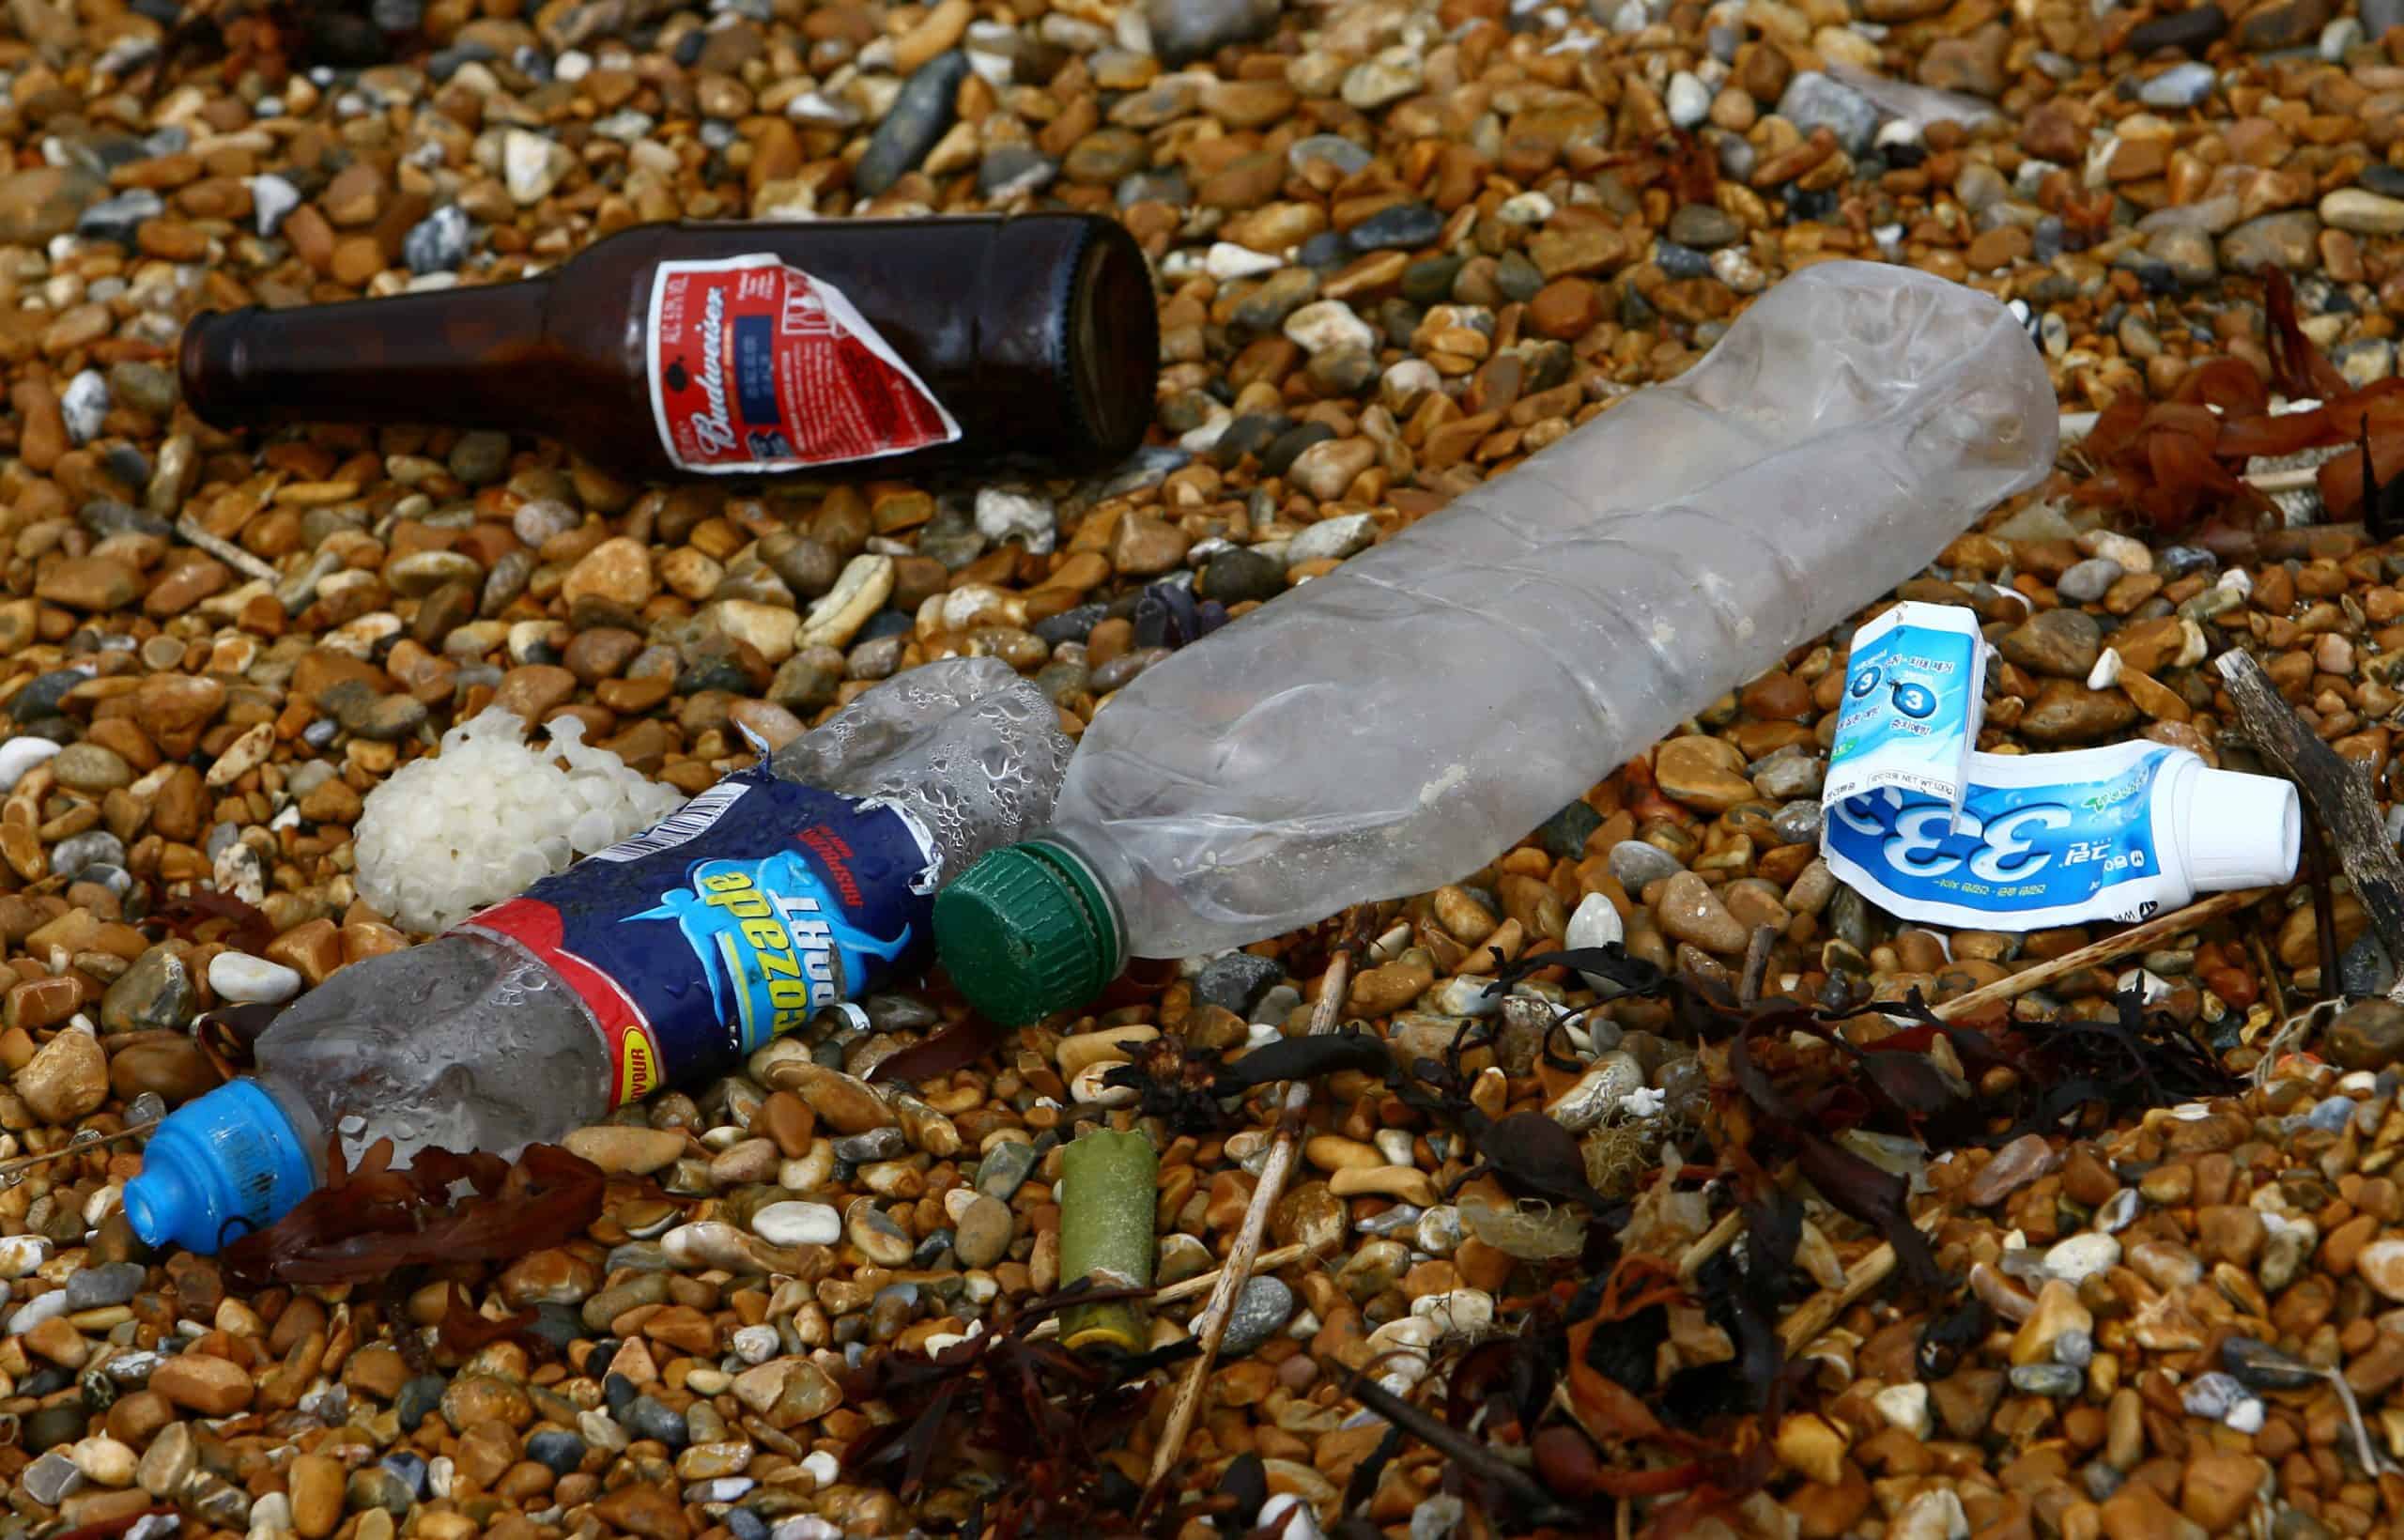 Watch – Concern as last summer led to ‘staggering increase’ in rubbish swamping UK beaches